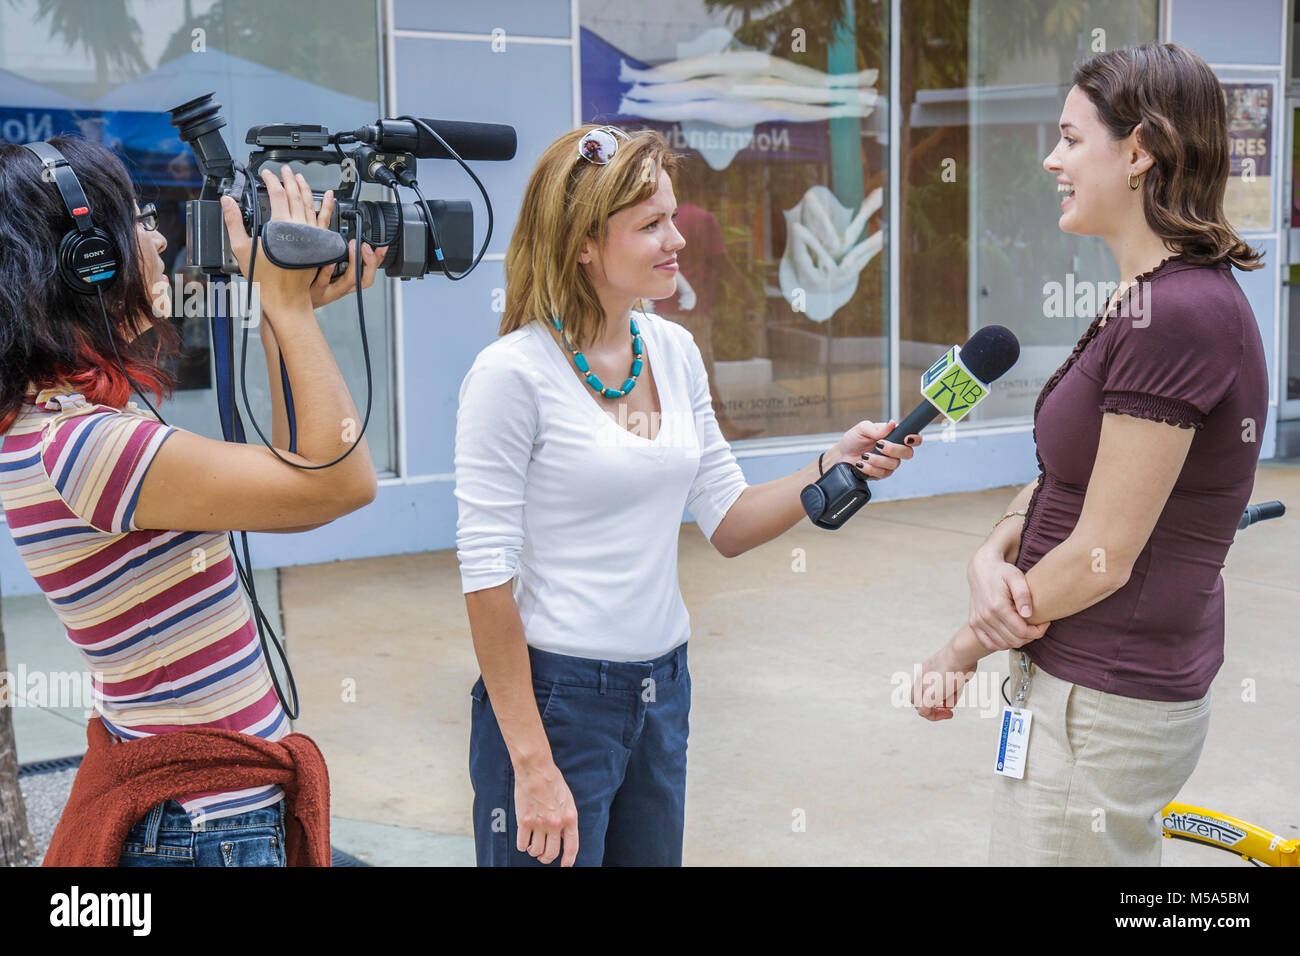 Miami Beach Florida,Lincoln Road,woman female women,videographer video camera interviews interviewing media TV television city,community cable station Stock Photo